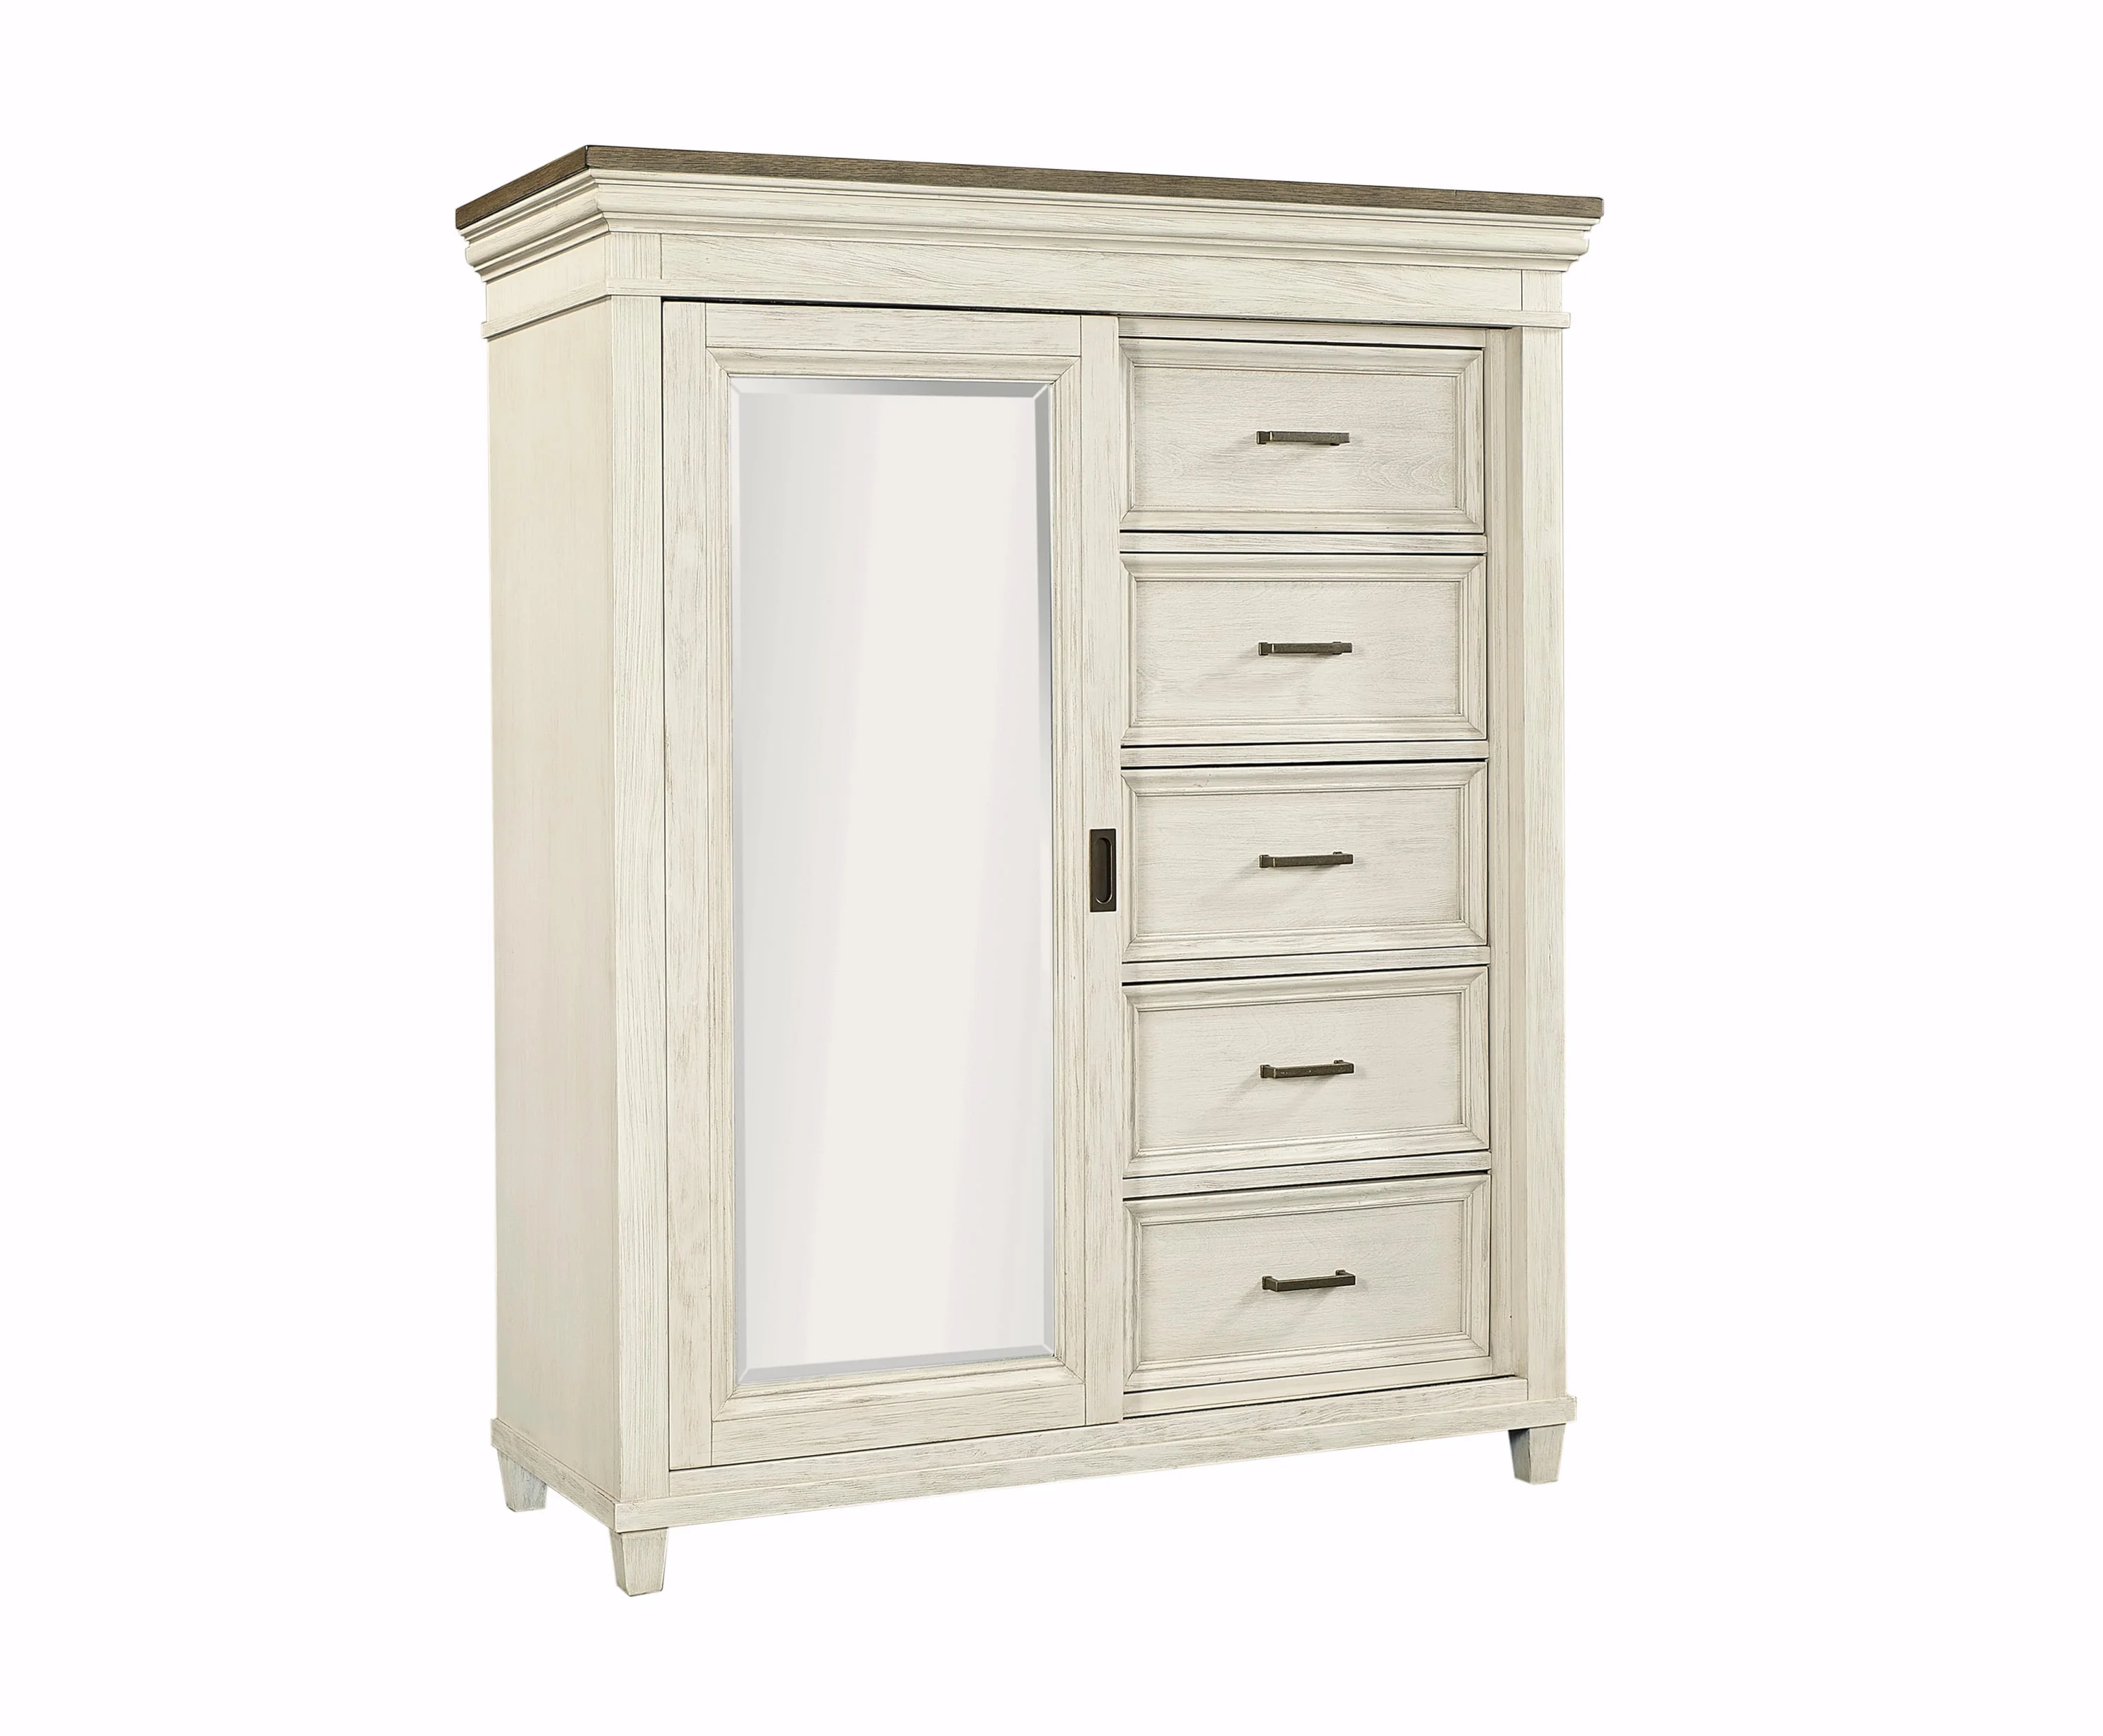 Aspenhome Caraway I248-457-2 Farmhouse 5-Drawer Bedroom Chest with ...